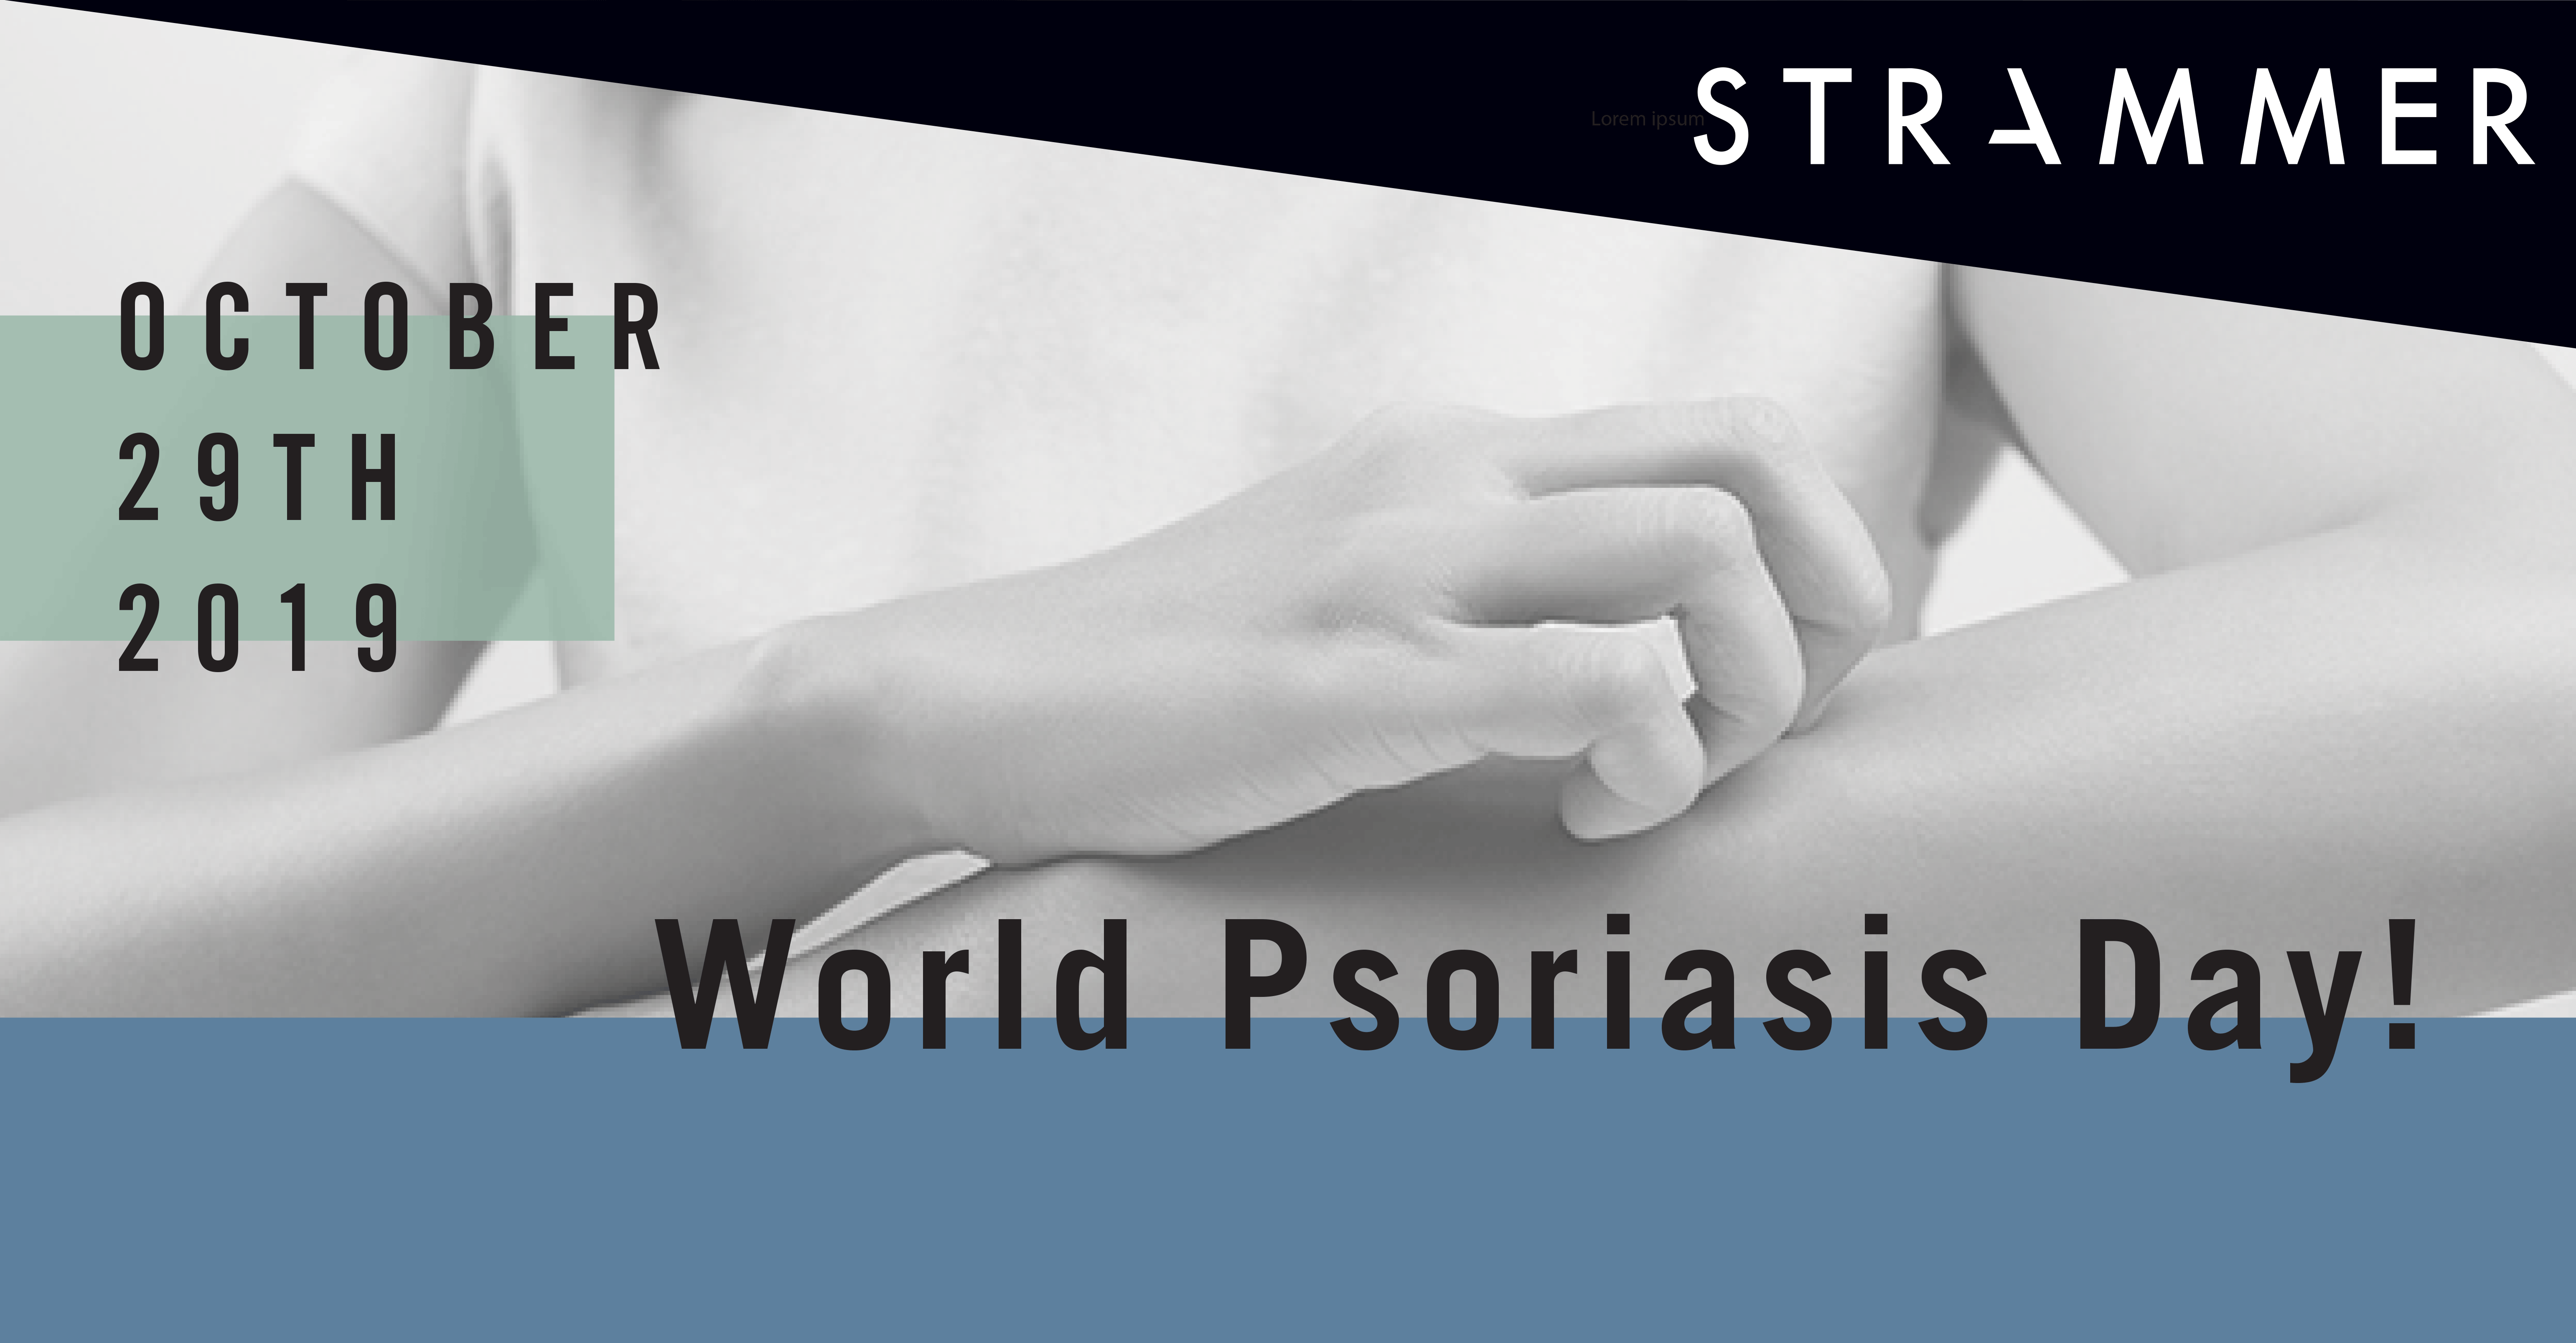 World Psoriasis Day: October 29, 2019